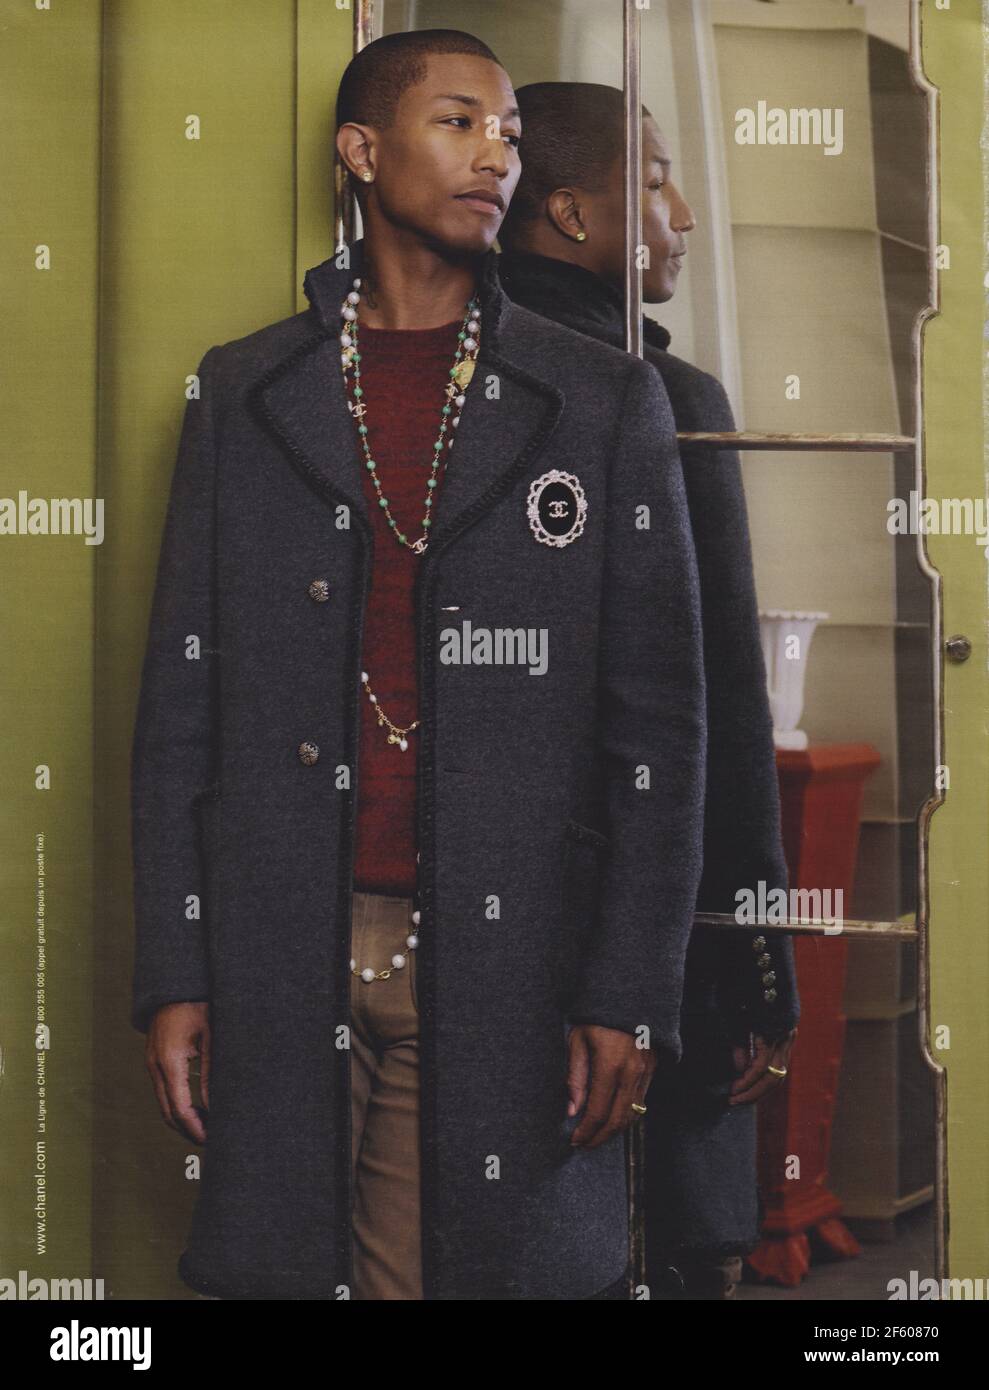 poster advertising CHANEL fashion house with Pharrell Williams in paper magazine from 2015 year, advertisement, creative CHANEL advert from 2010s Stock Photo